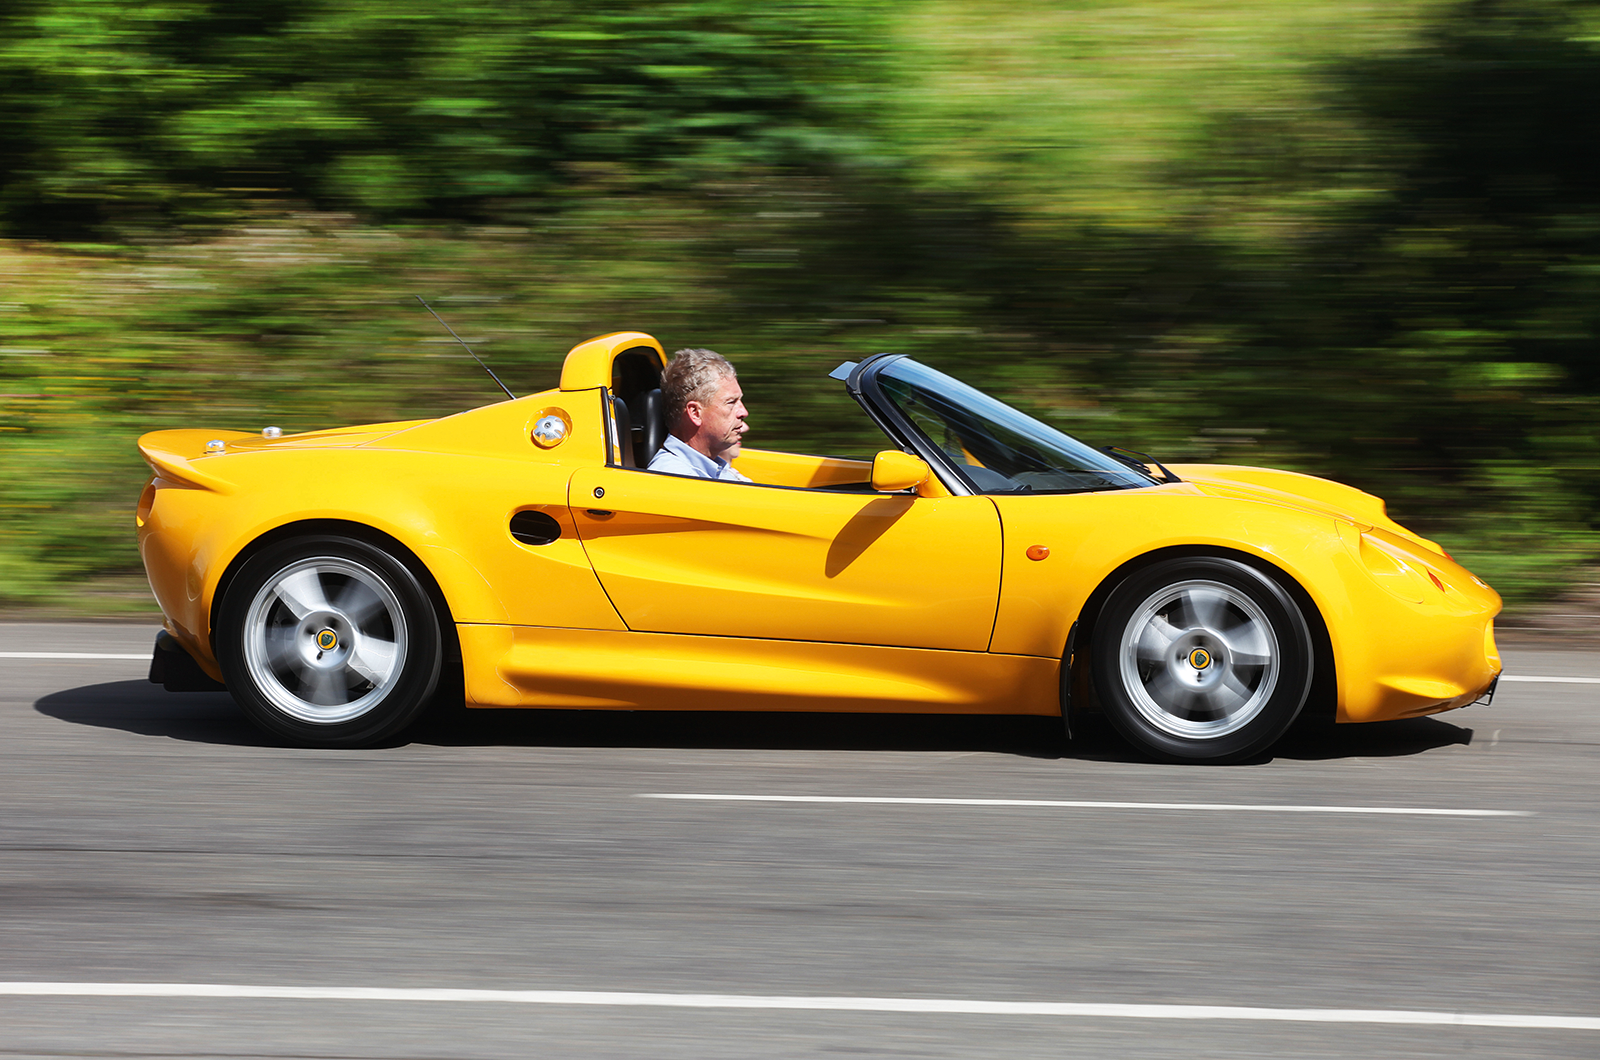 Classic & Sports Car – Why the Lotus Elise is so special